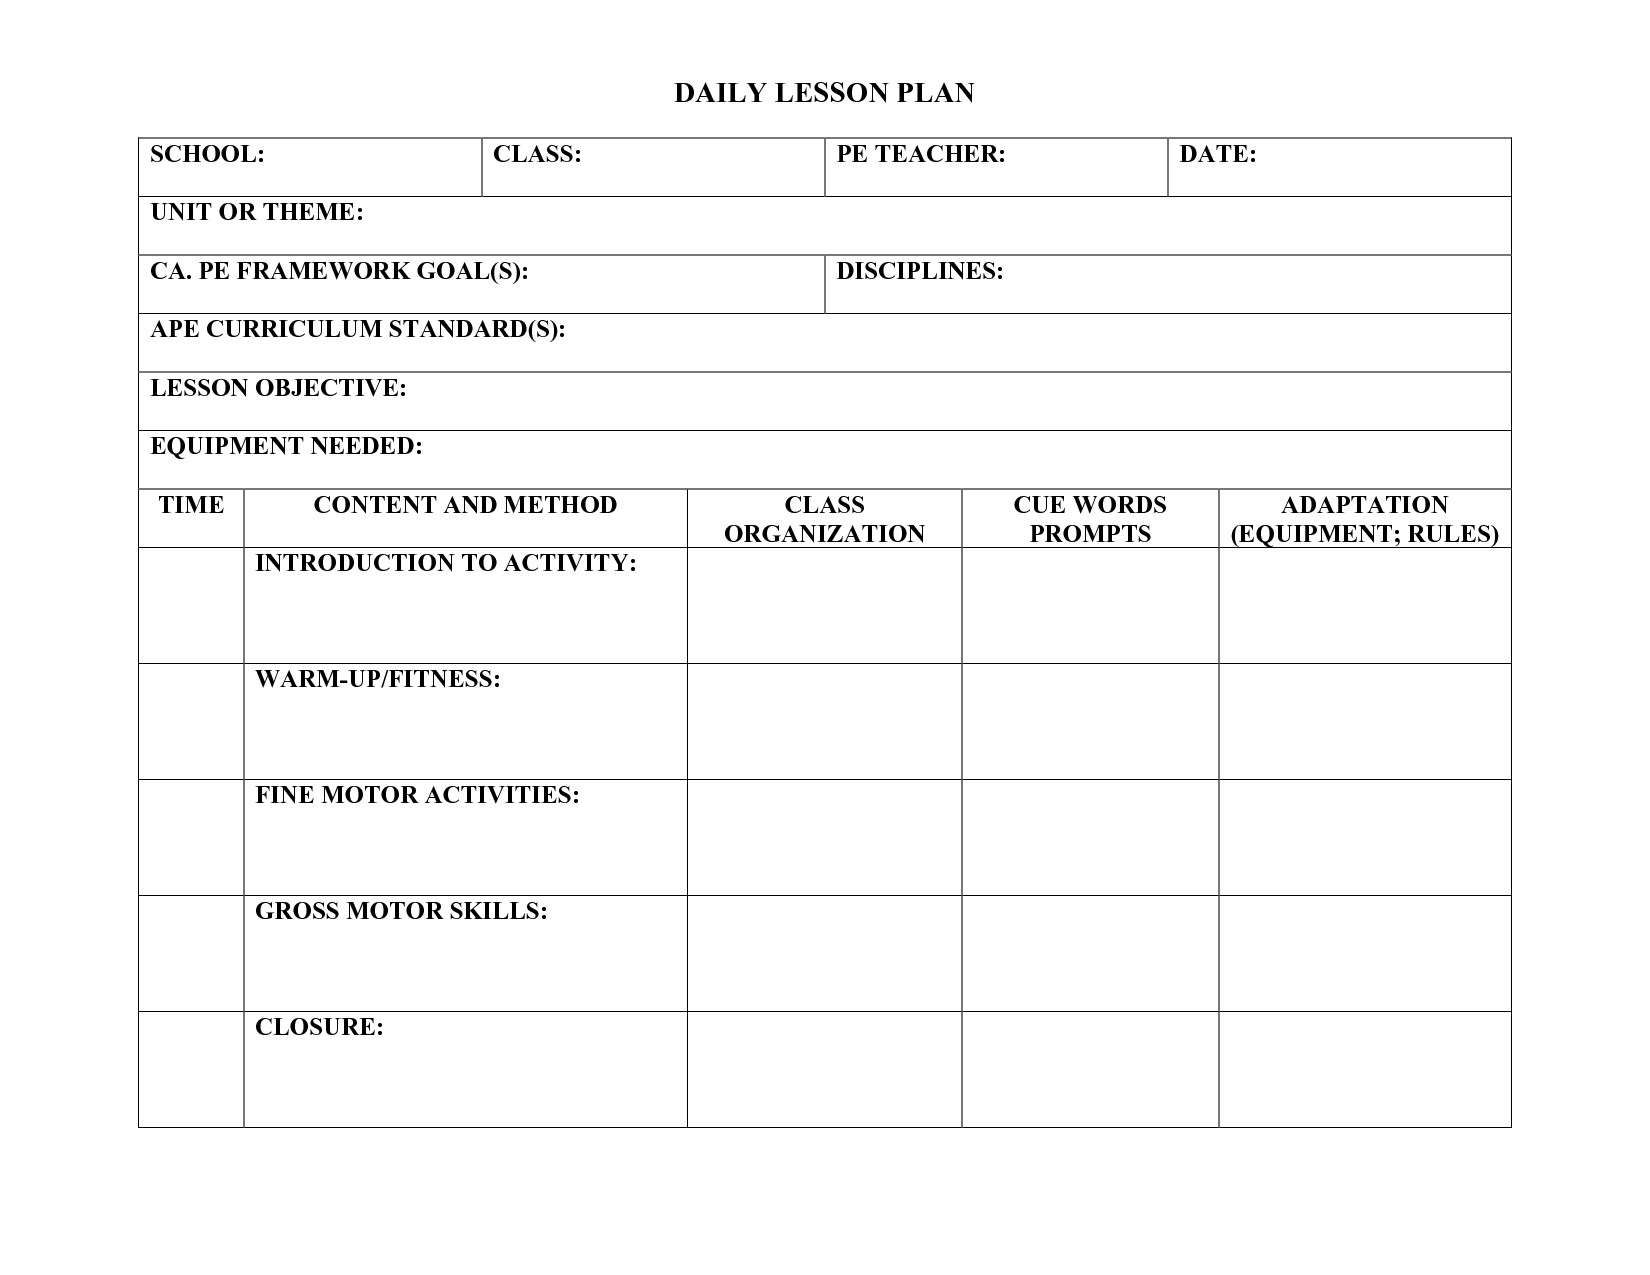 Lesson Plan Activities Daily Lesson Plan Template